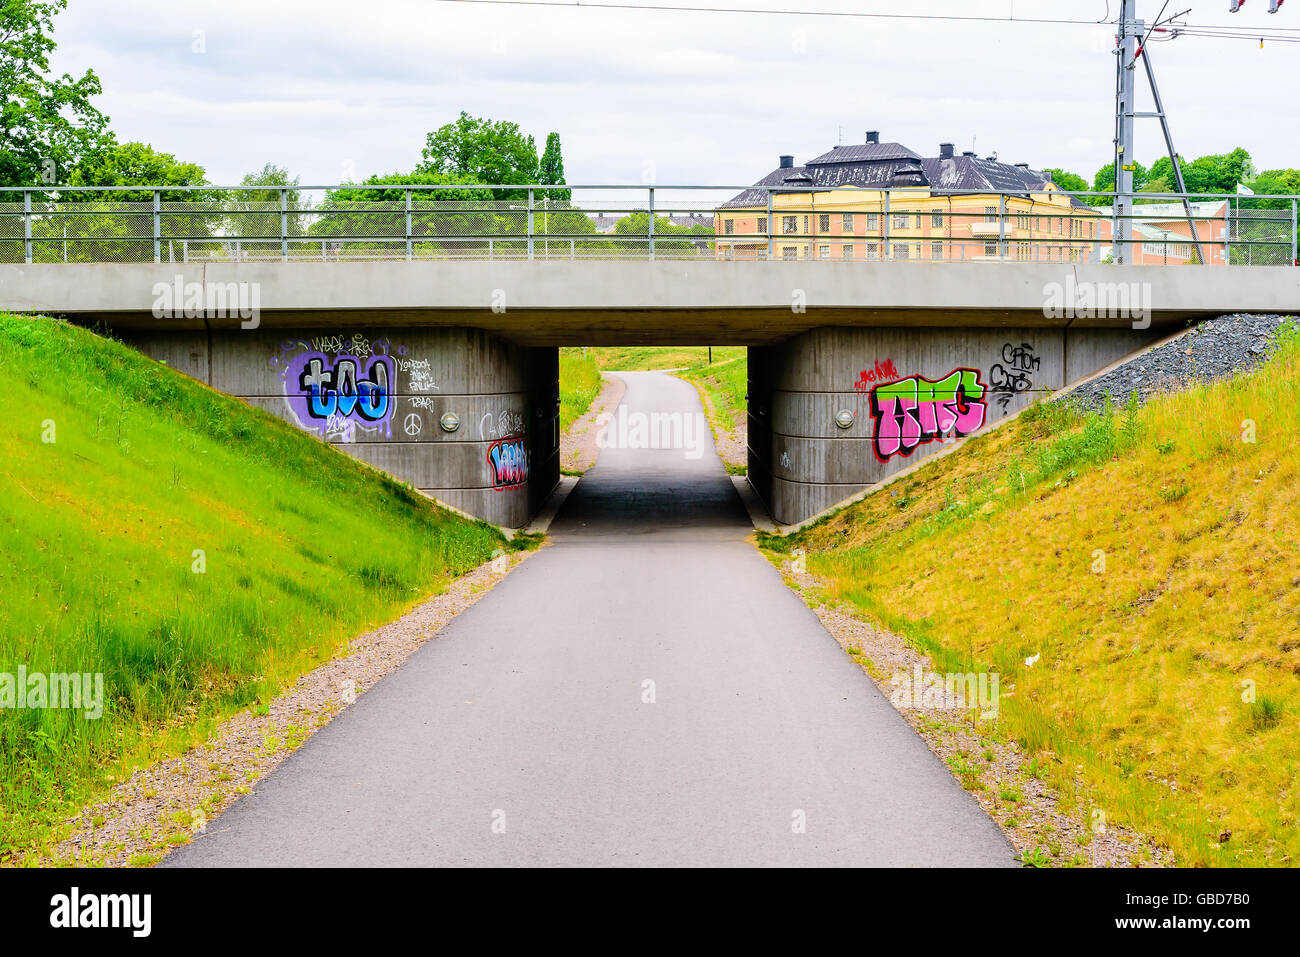 Motala, Sweden -June 21, 2016: Graffiti painted on either sides of a viaduct passing over a walkway. Stock Photo